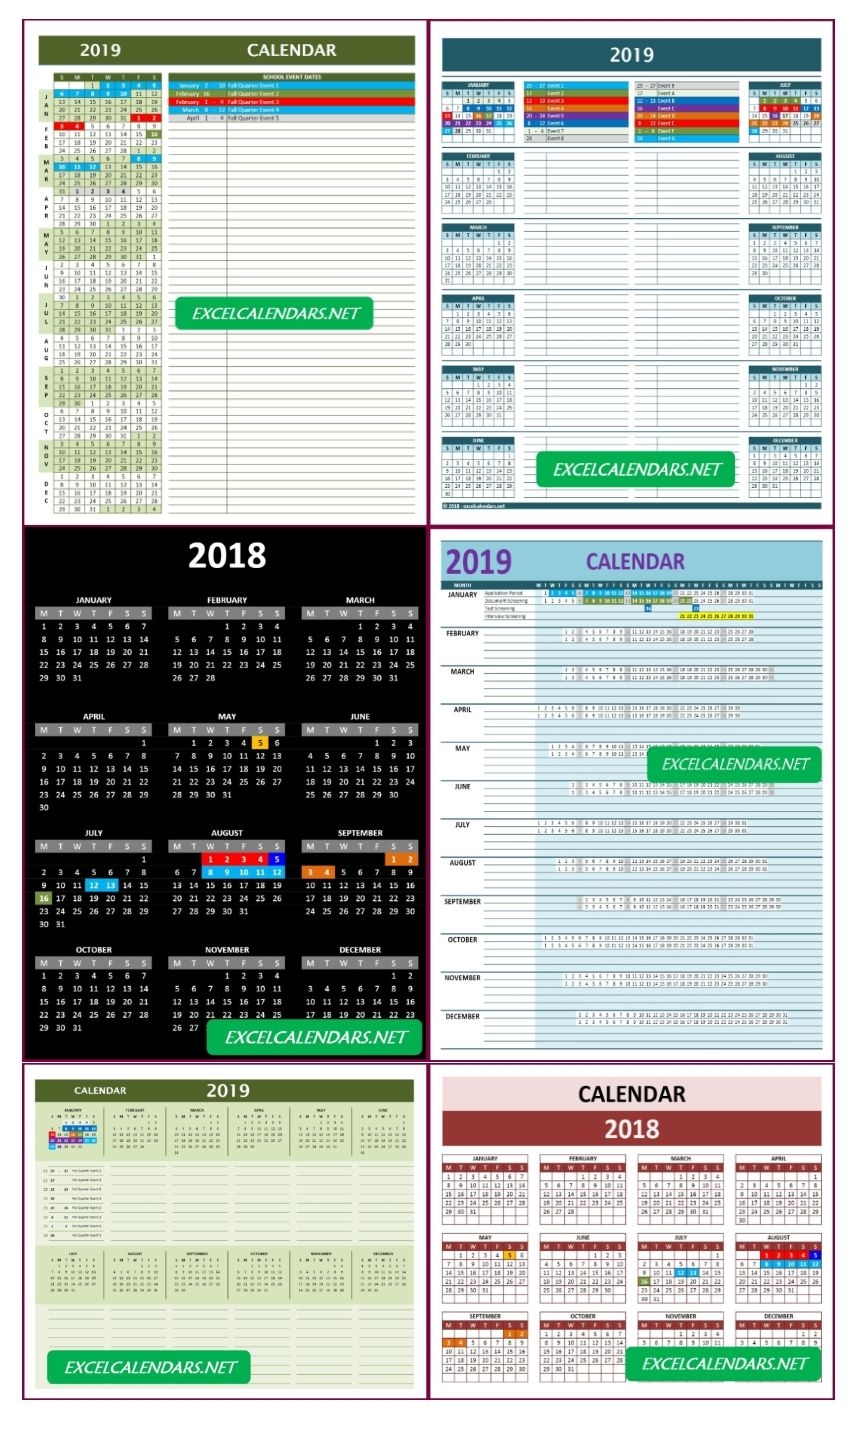 Yearly Calendar Templates For Year 2019 | 2020 | 2021